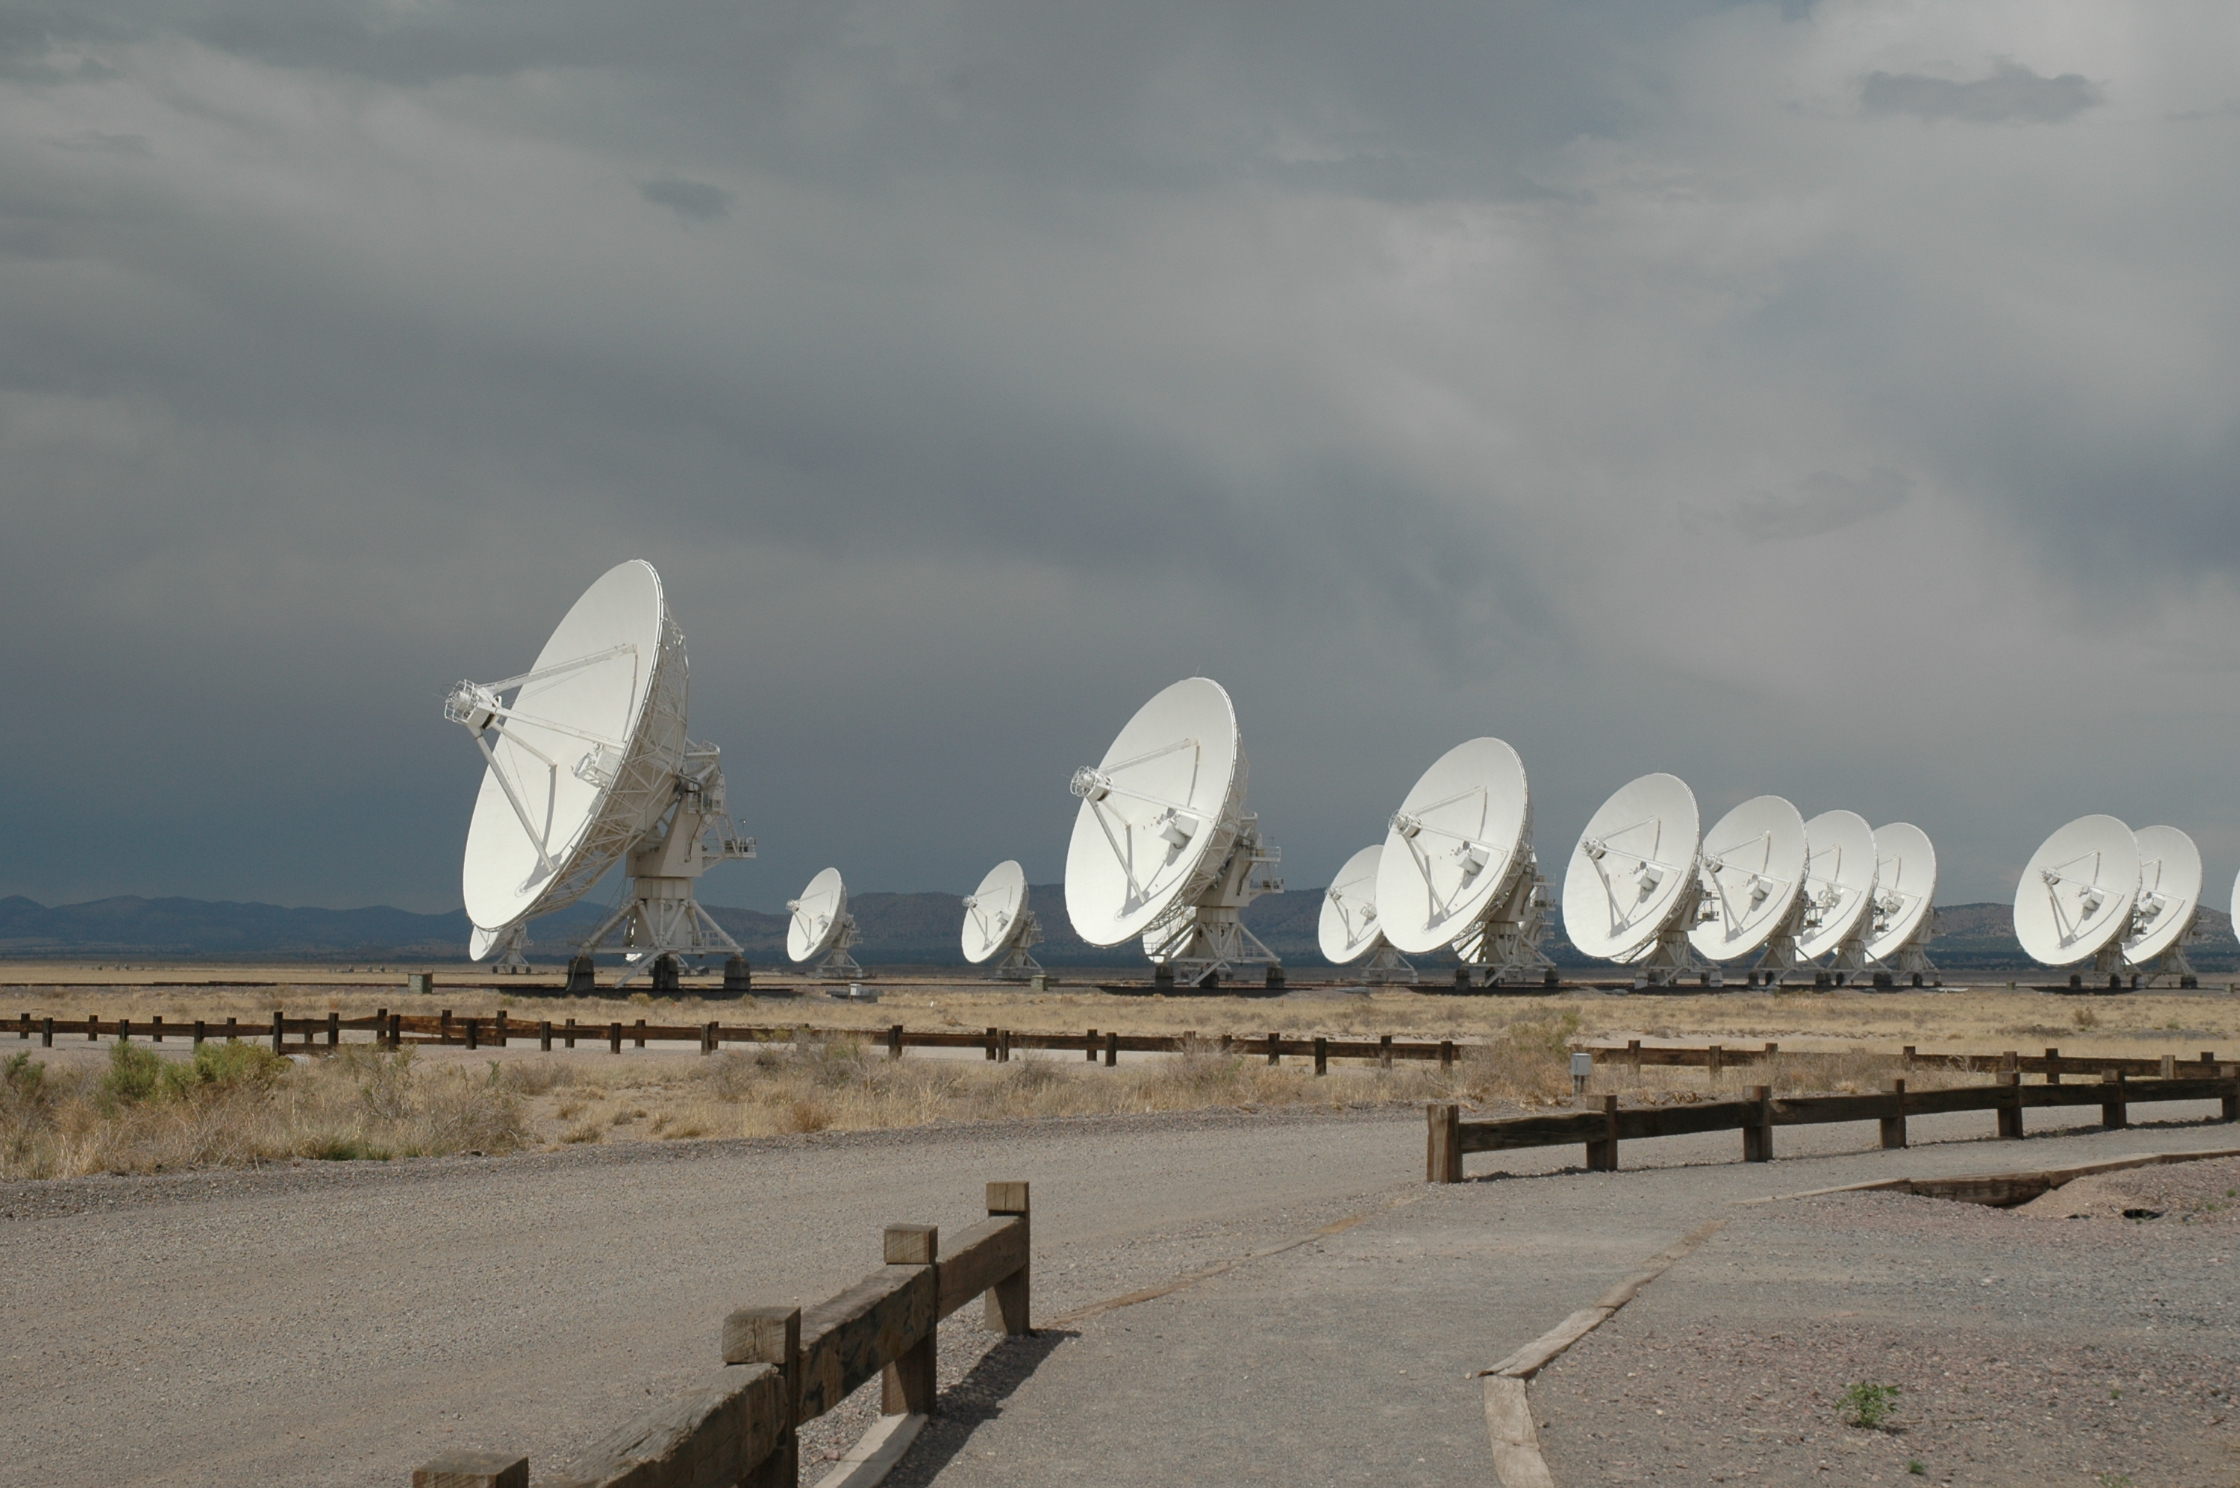 Field with a number of large satellites at the National Radio Astronomy Observatory Very Large Array.